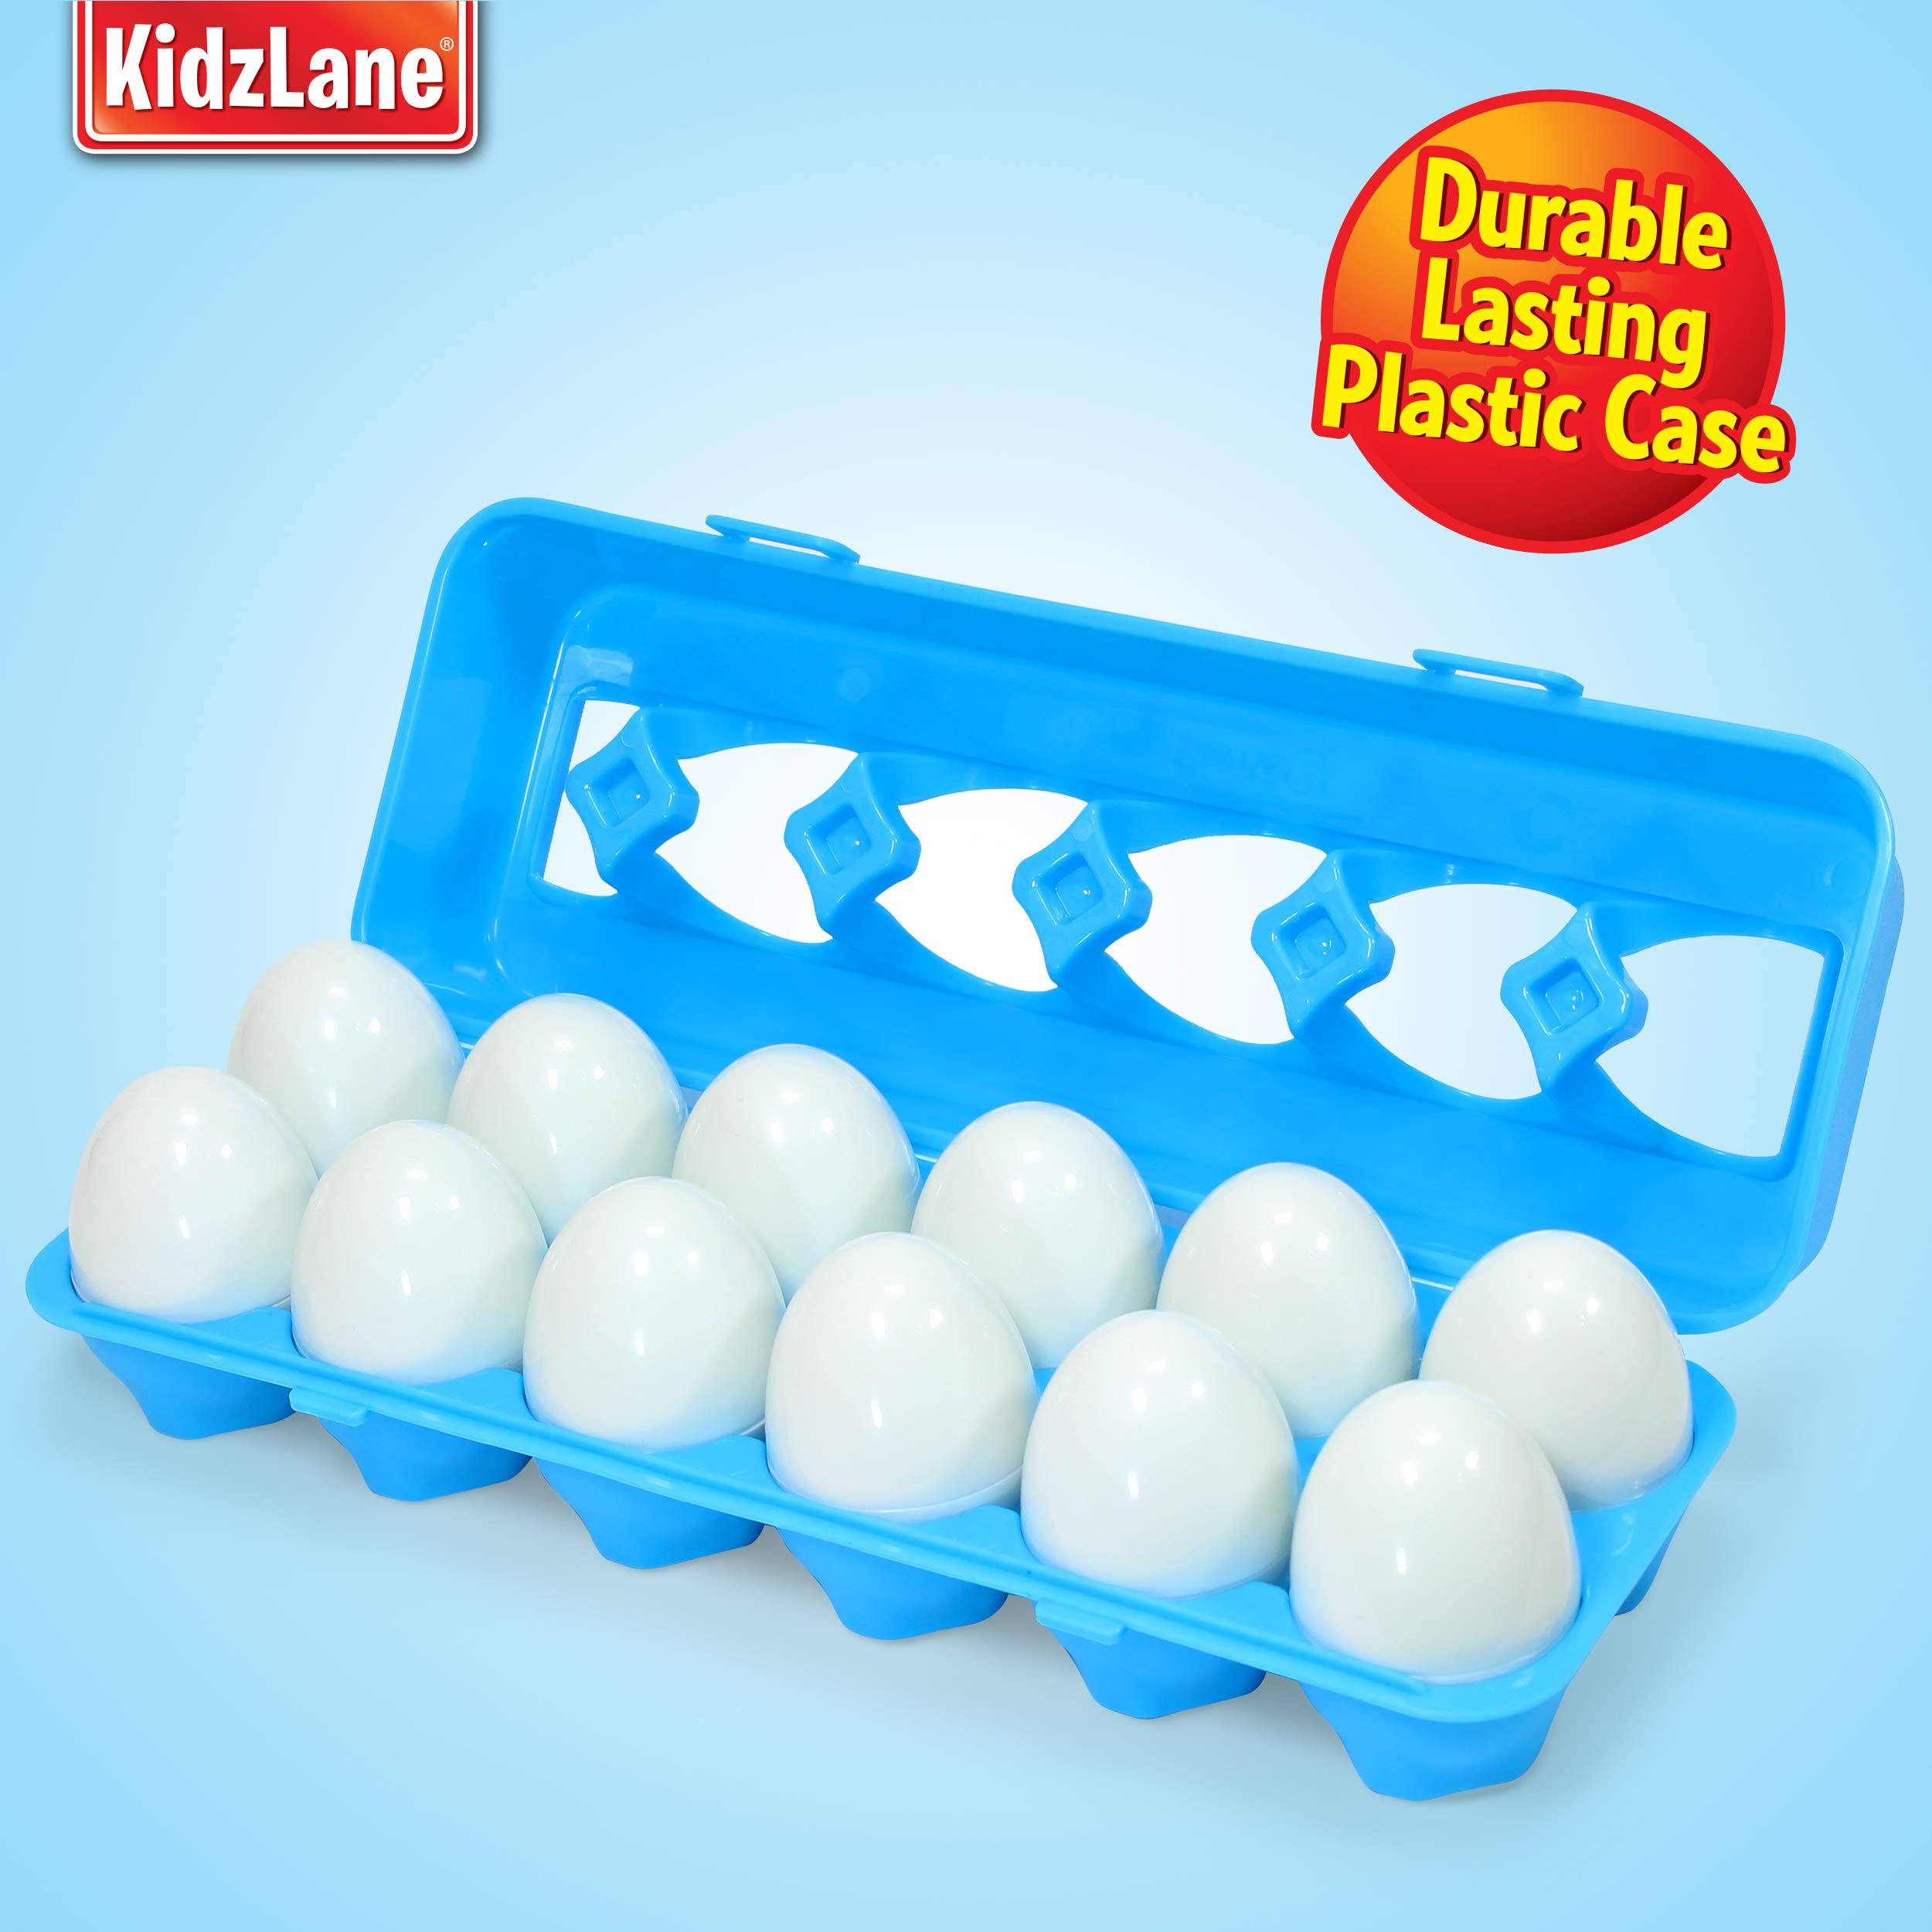 "Kidzlane Sorting & Matching Educational Egg Toy – Teach Colors, Shapes & Fine Motor Skills - 12 Sturdy Eggs in Plastic Carton – 100% Toddler & Child Safe 18M+" - image 4 of 6